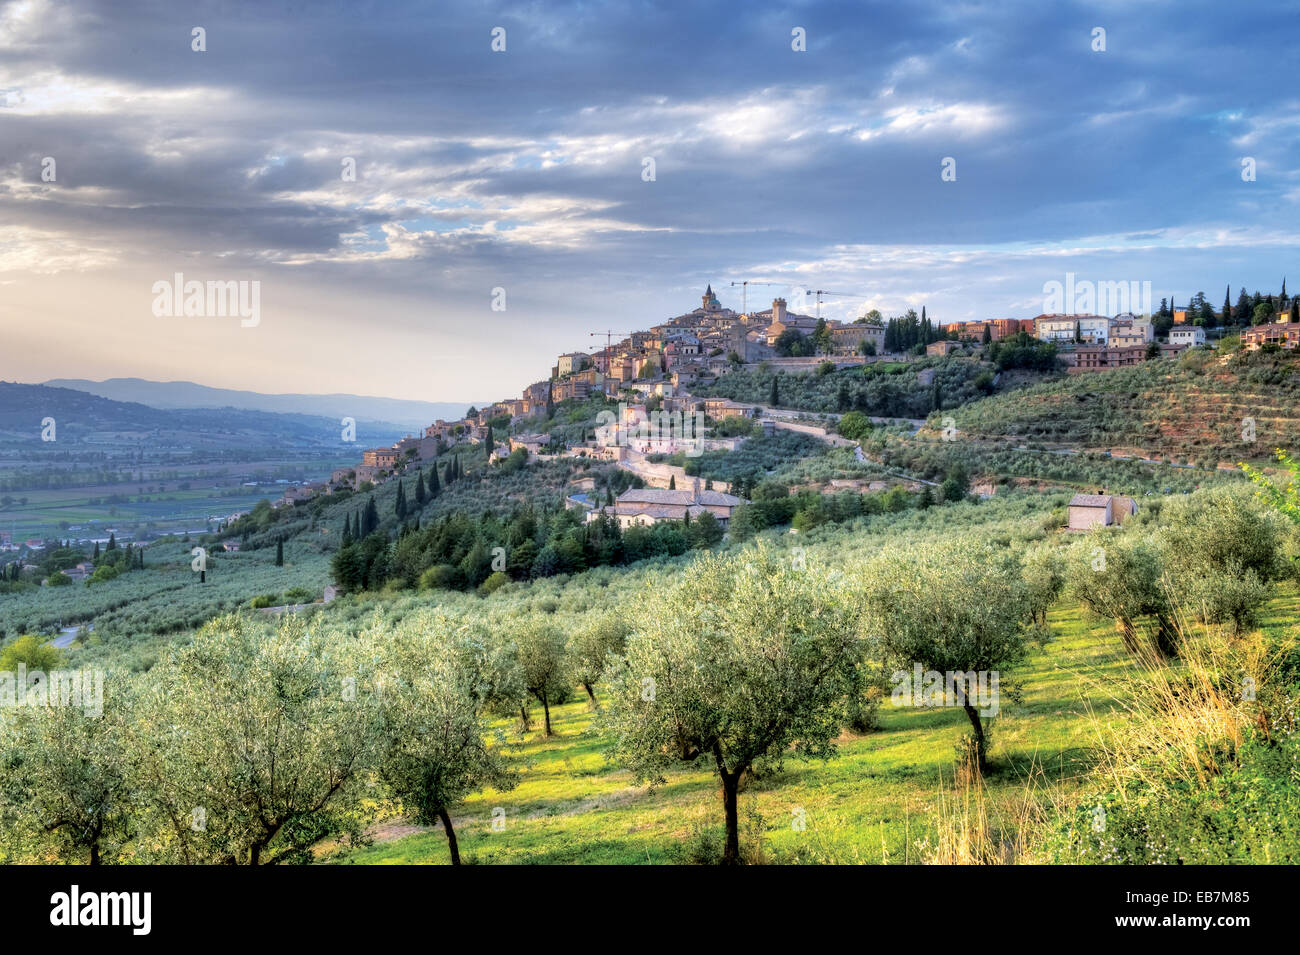 Trevi, Umbria. The village, one of the most beautiful towns in Italy, on top of a hill, surrounded by olive trees. Stock Photo